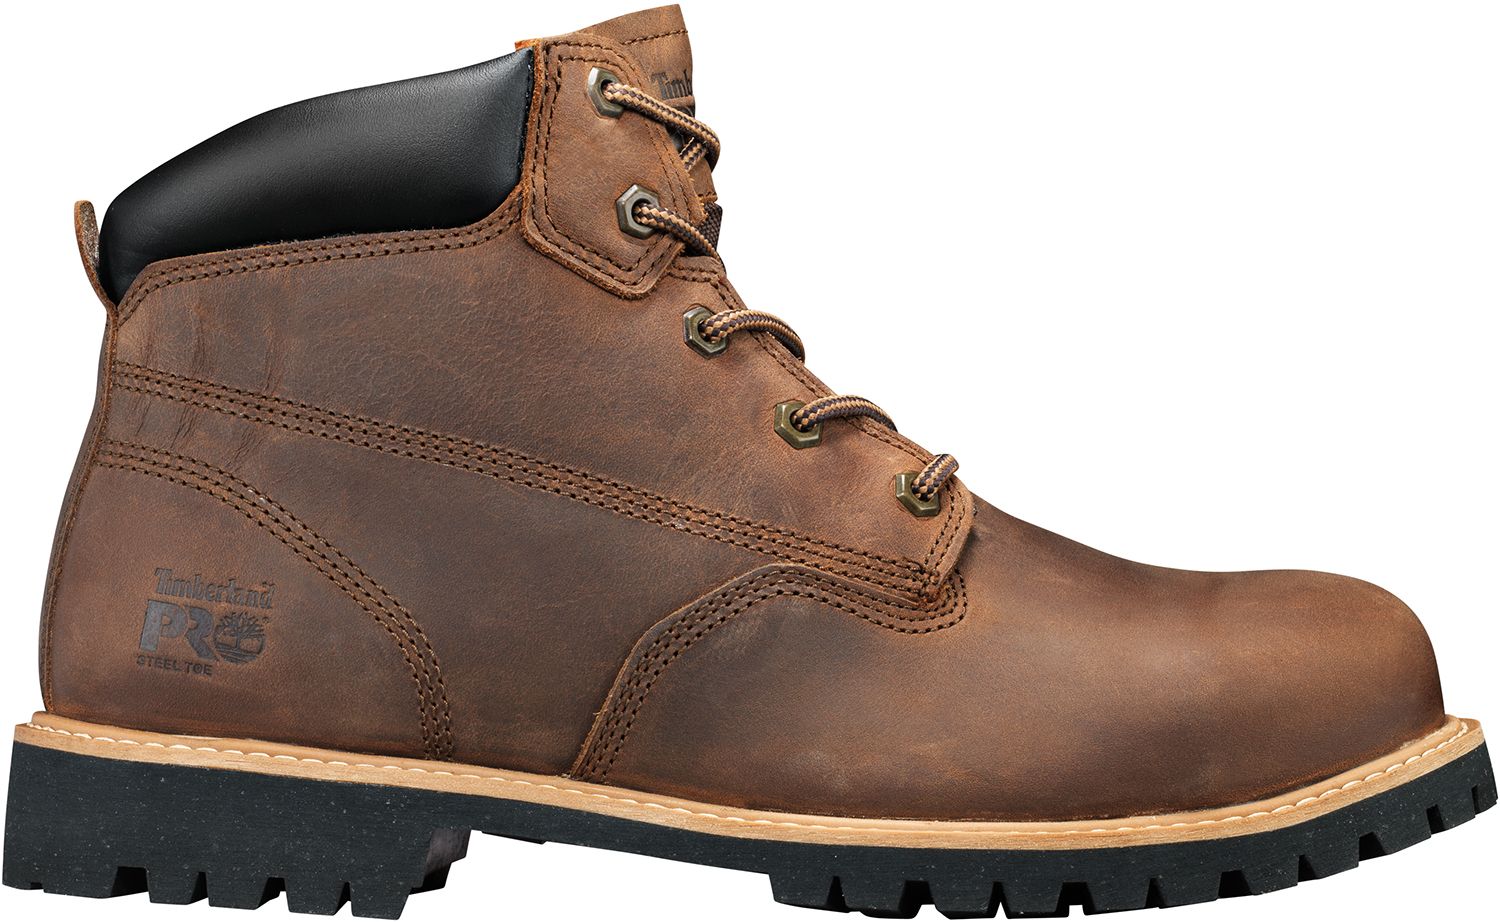 timberland construction shoes